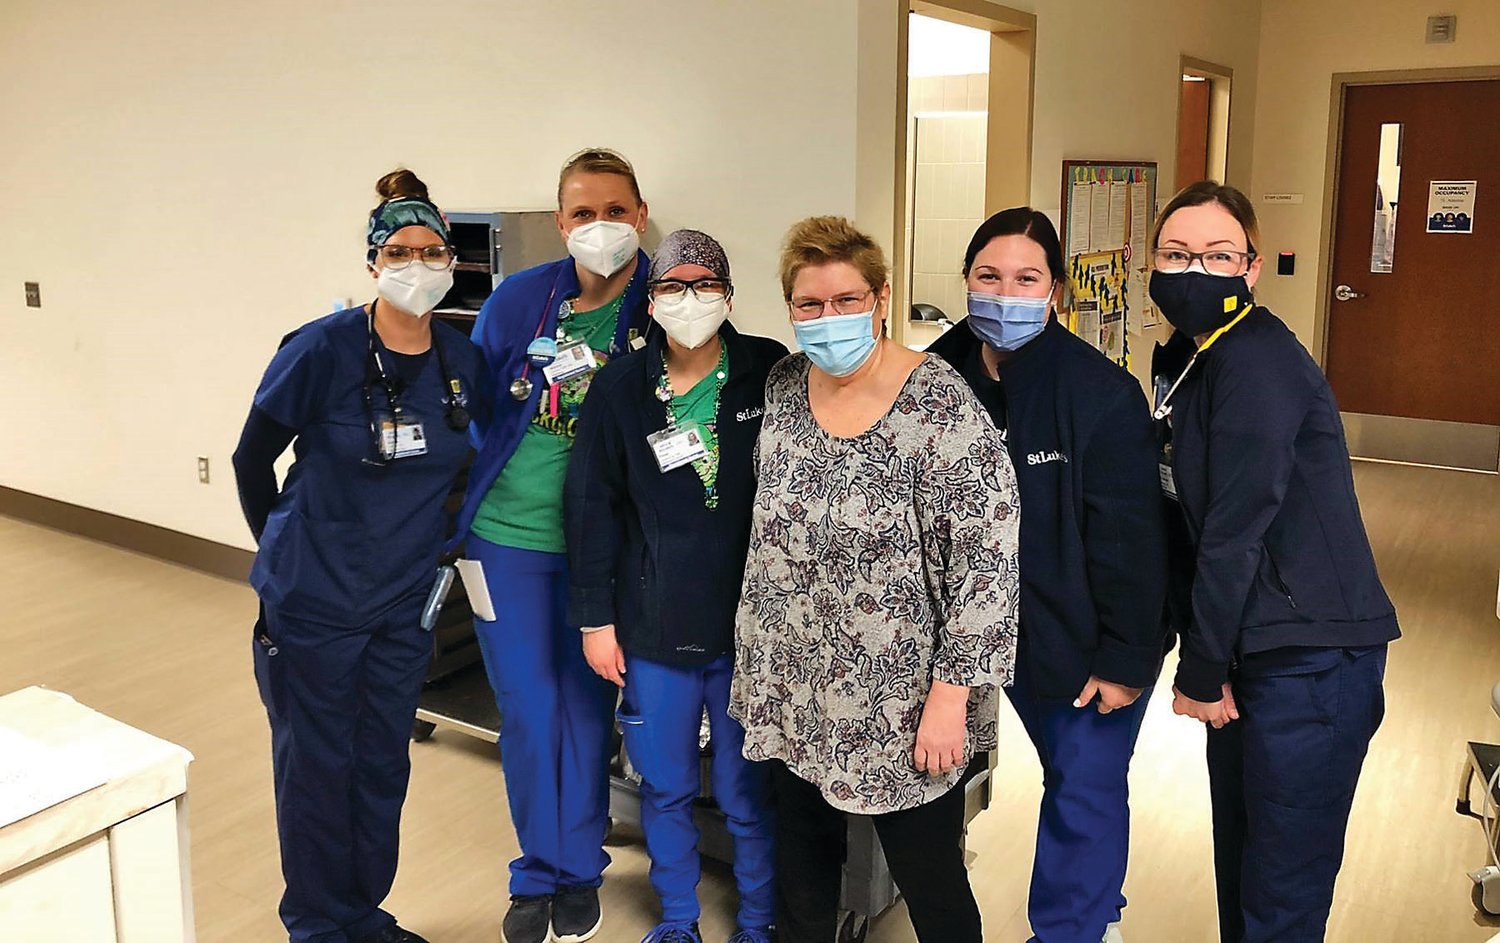 Michele Grida’s caregivers at St. Luke’s Upper Bucks Campus celebrated her survival during Grida’s visit to the hospital to thank the staff of the ICU and third floor. From left are: registered nurses Brenda Costello, Melissa Juchno and Paige Lieberman, Michele Grida, and registered nurses Megan Maskornick and Sharon Michael Rogers.